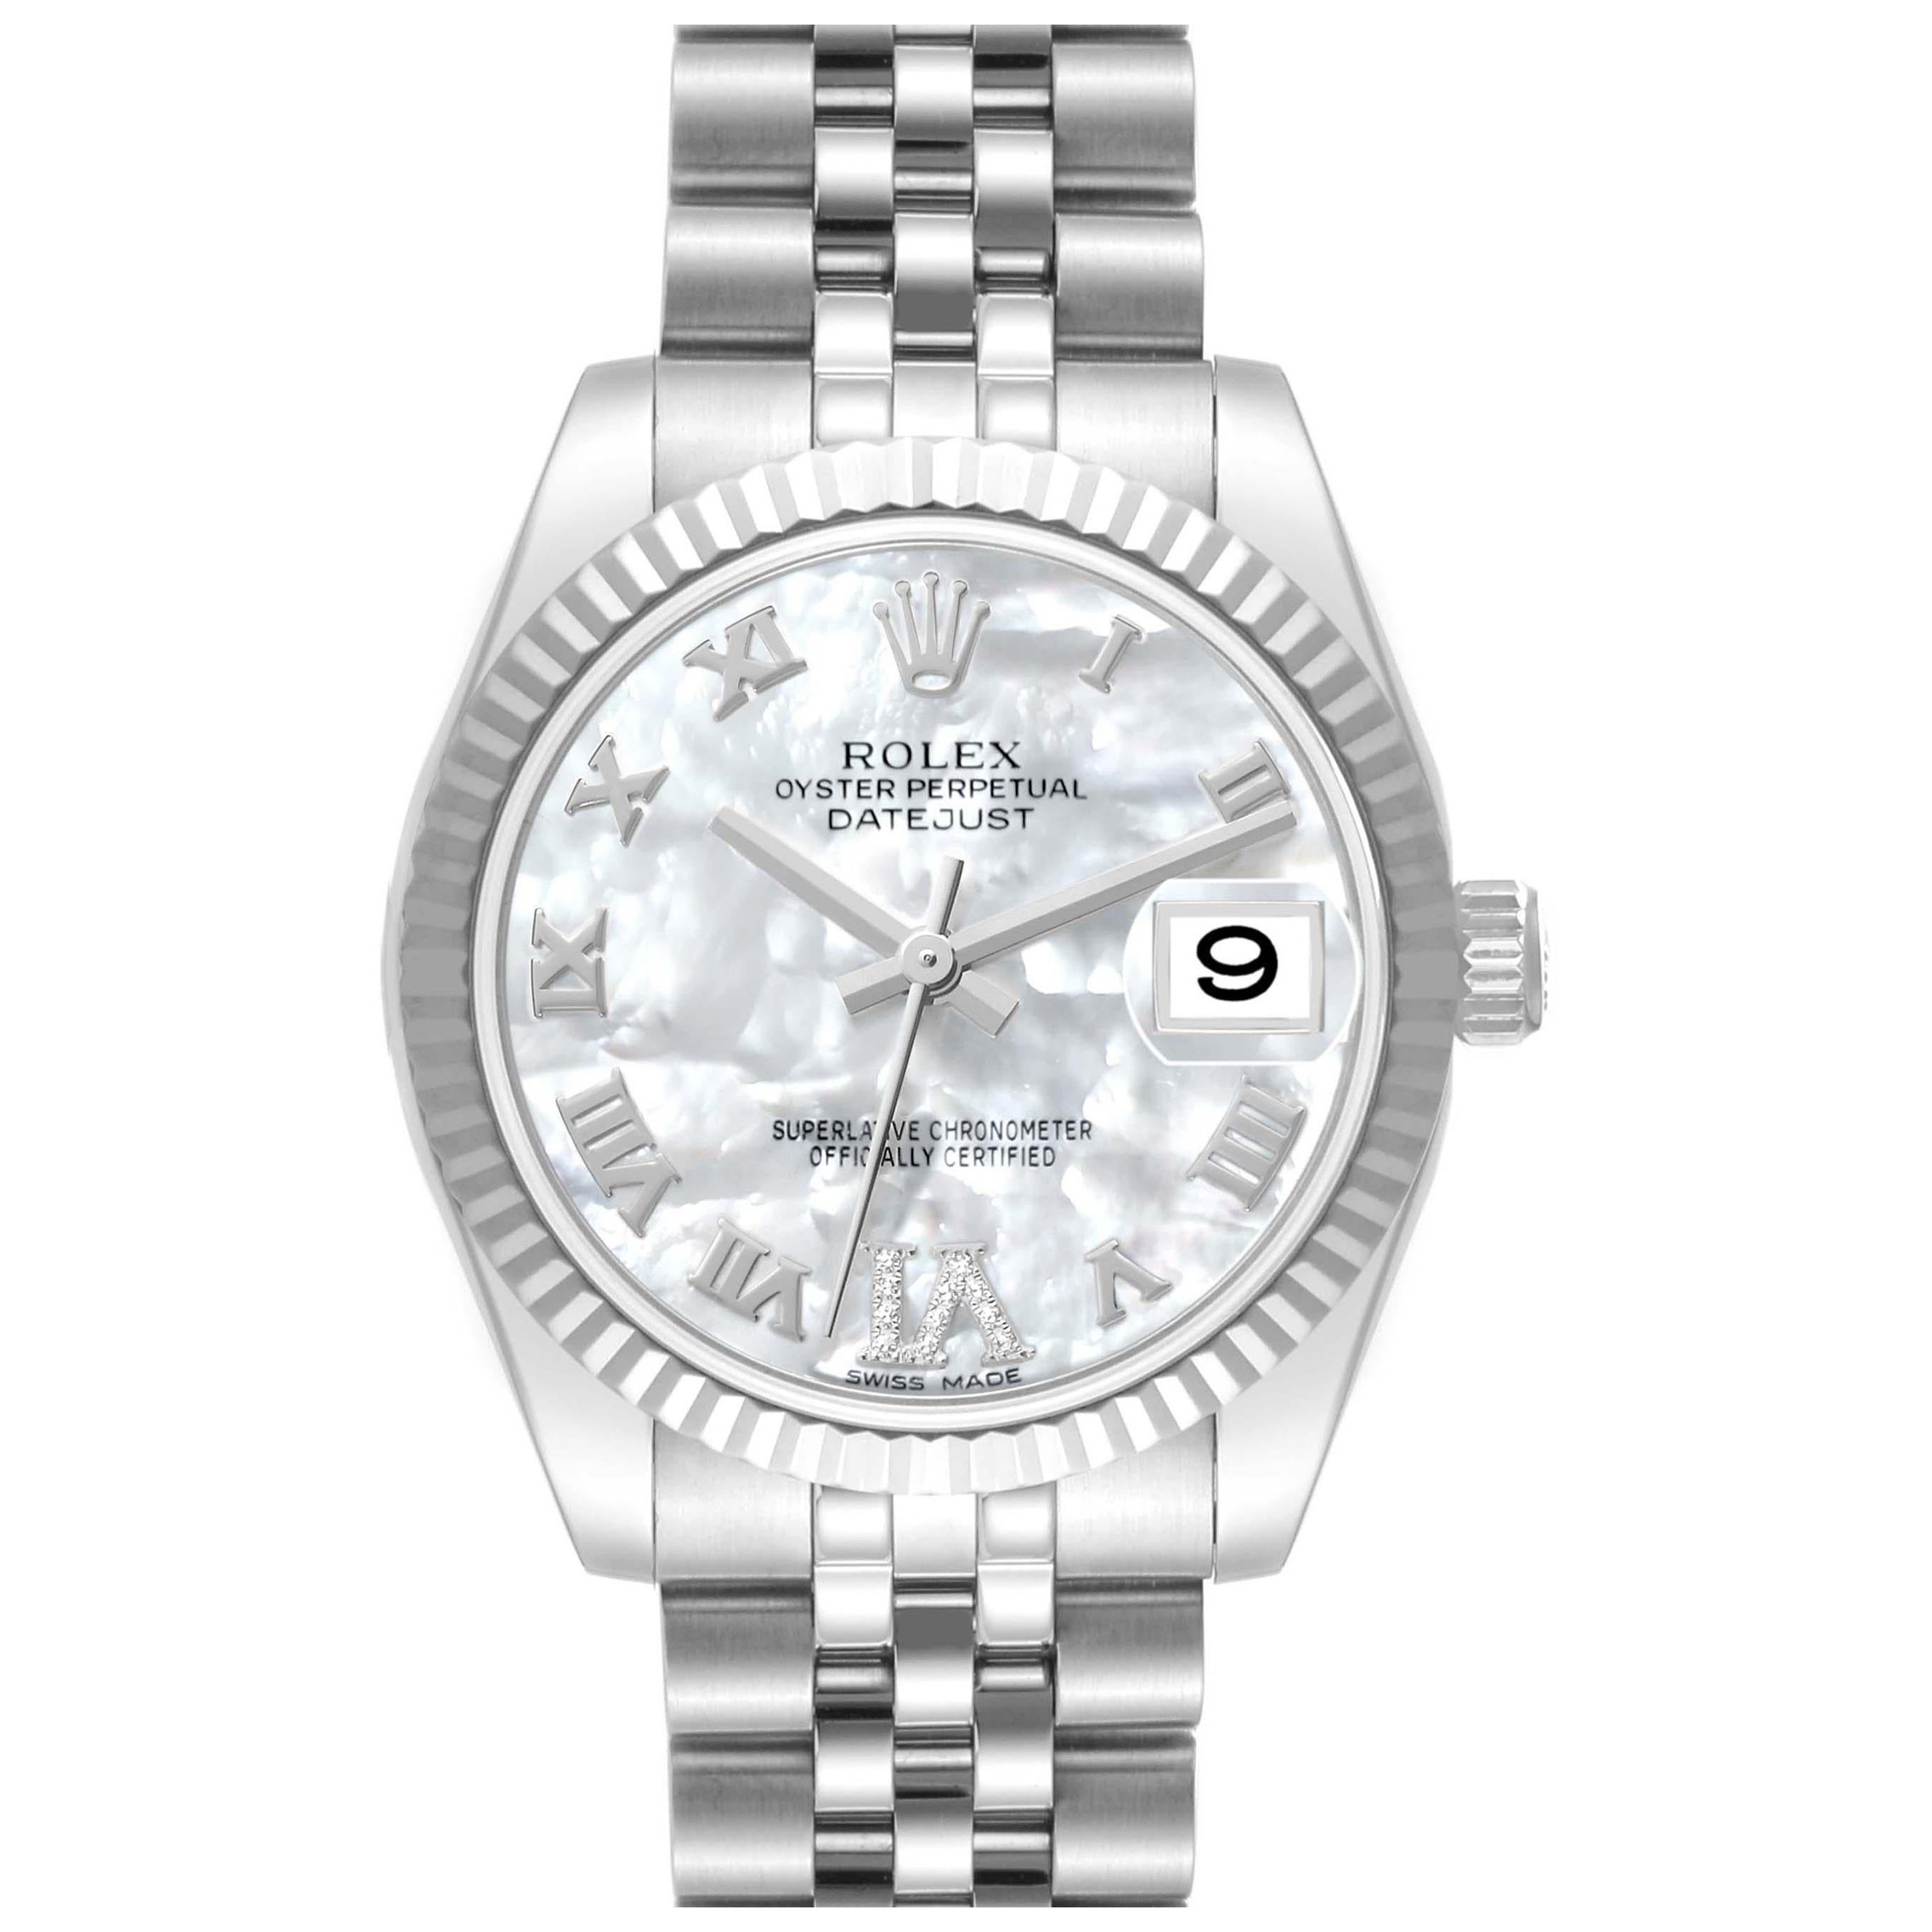 Rolex Datejust Midsize Mother Of Pearl Diamond Dial Steel White Gold Watch